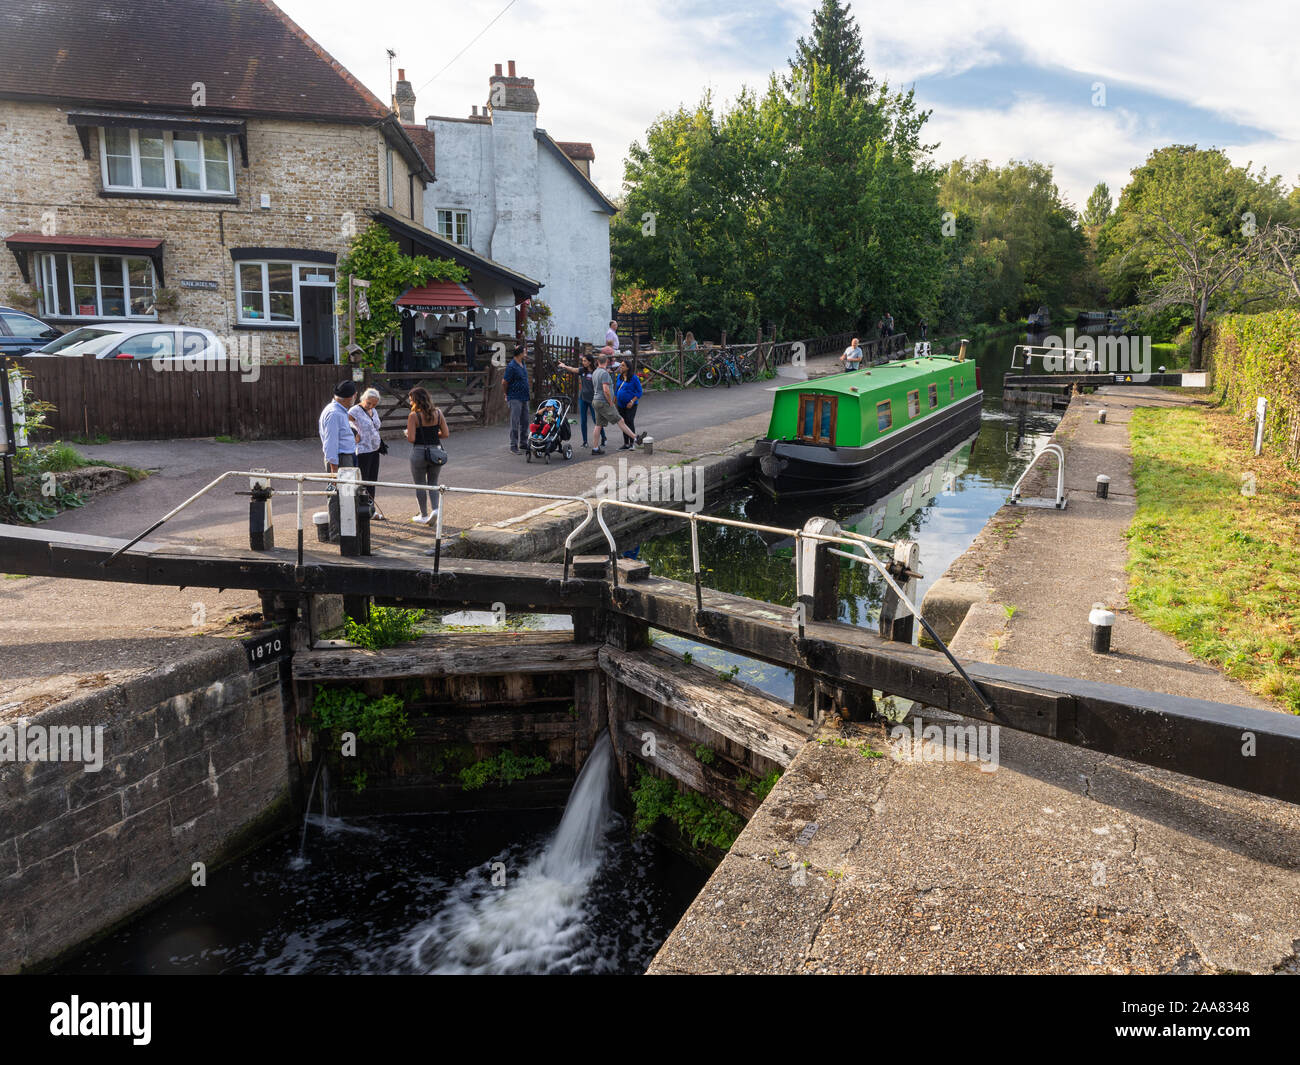 London, England, UK - September 14, 2019: People walk and cycle along the Grand Union Canal towpath while a traditional narrowboat navigates Black Jac Stock Photo